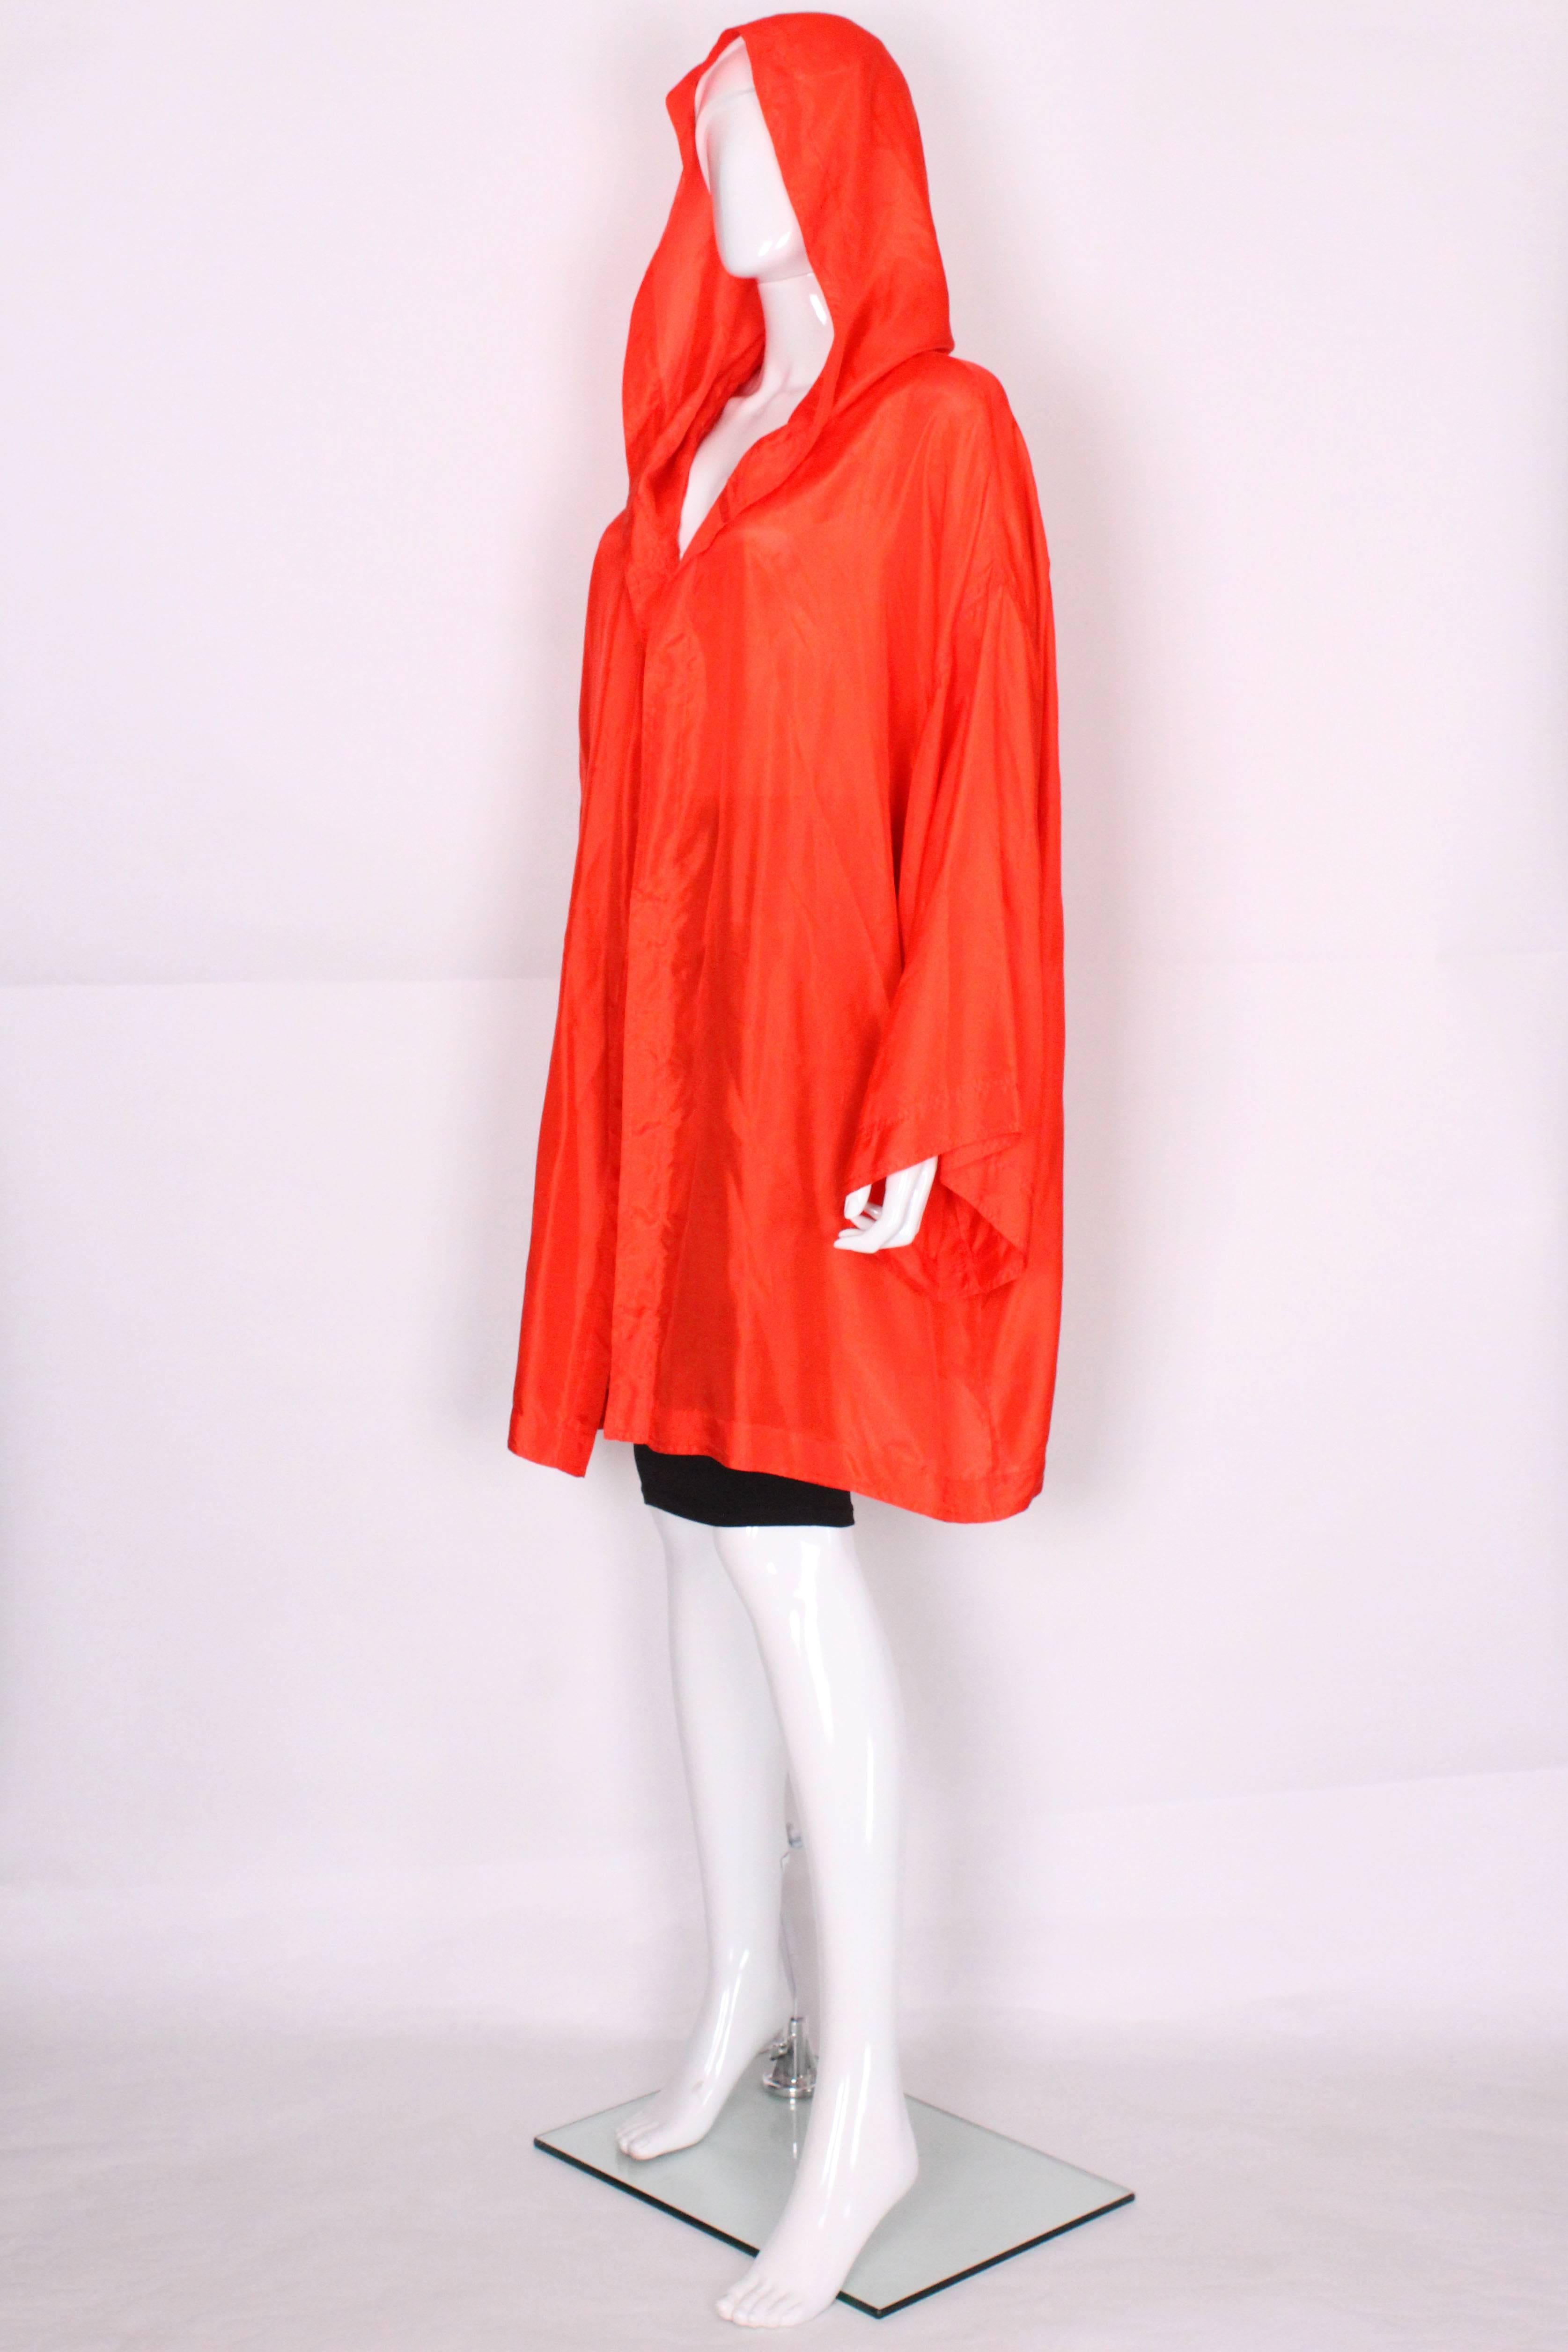 Red Silk Oversize Jacket With Hood by Issac Mizrahi